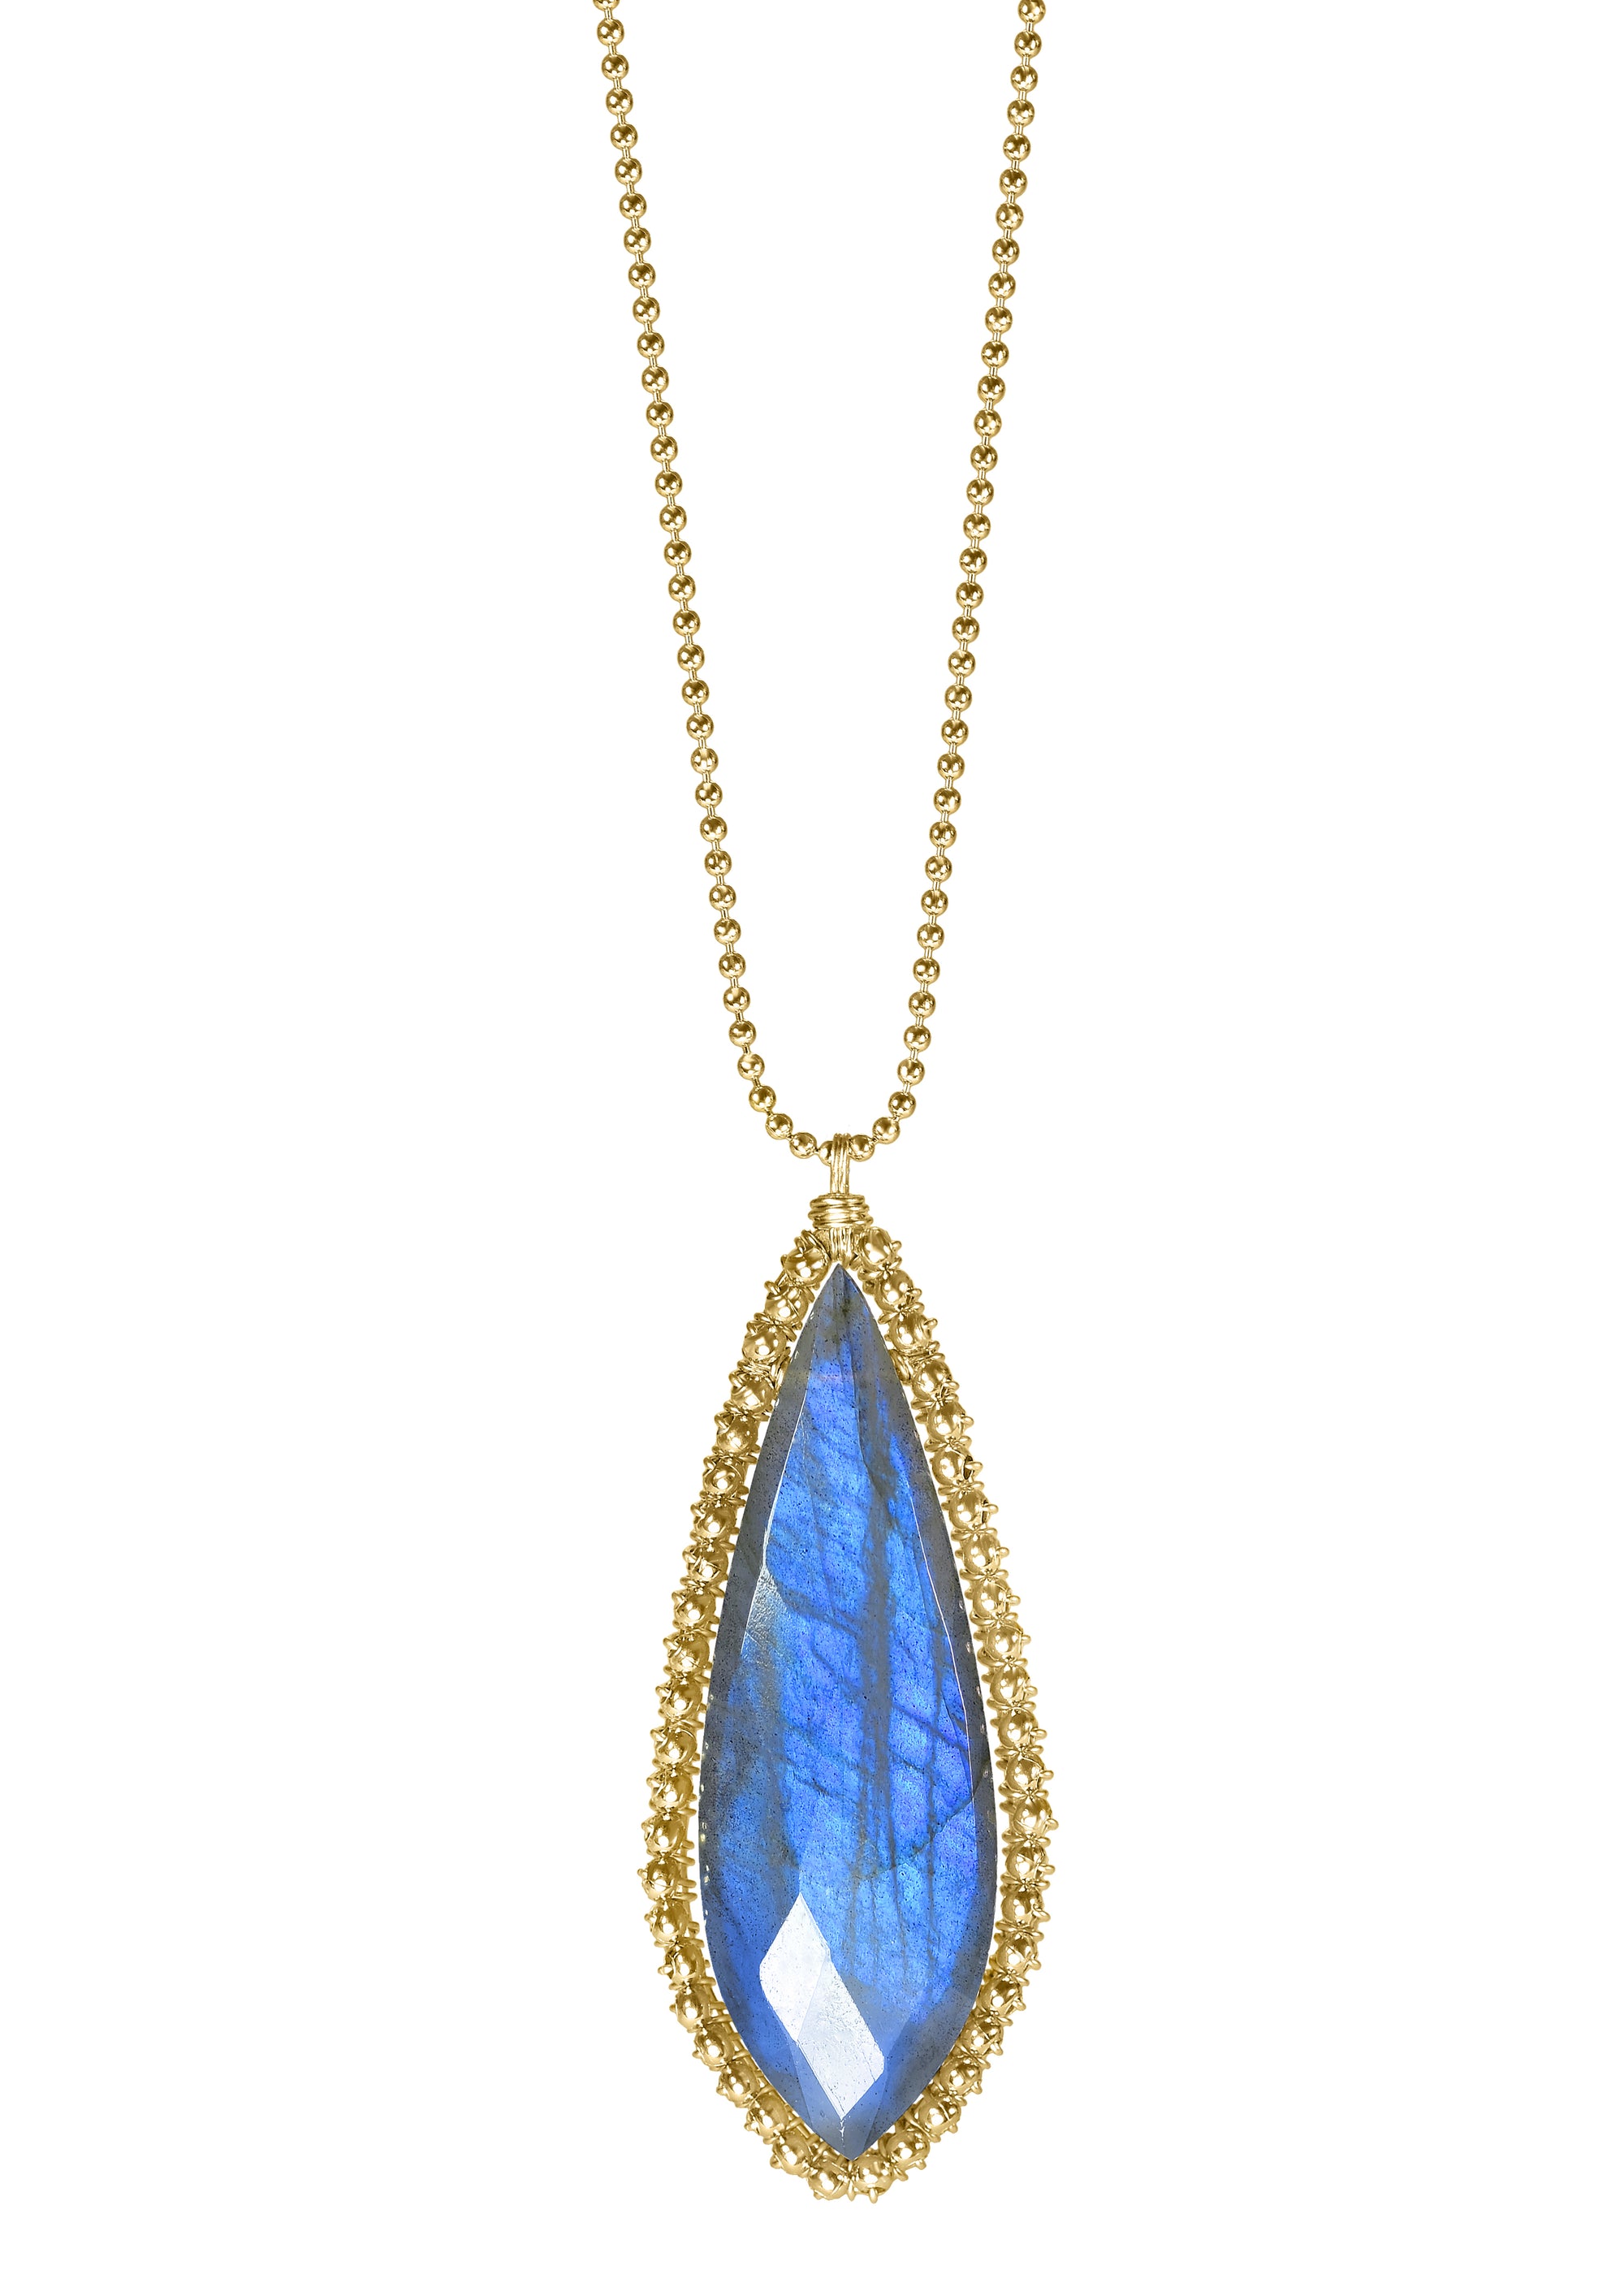 Labradorite 14k gold fill Necklace measures 30" in length Pendant measures 1-1/4" in length and 1/2" in width at the widest point Handmade in our Los Angeles studio